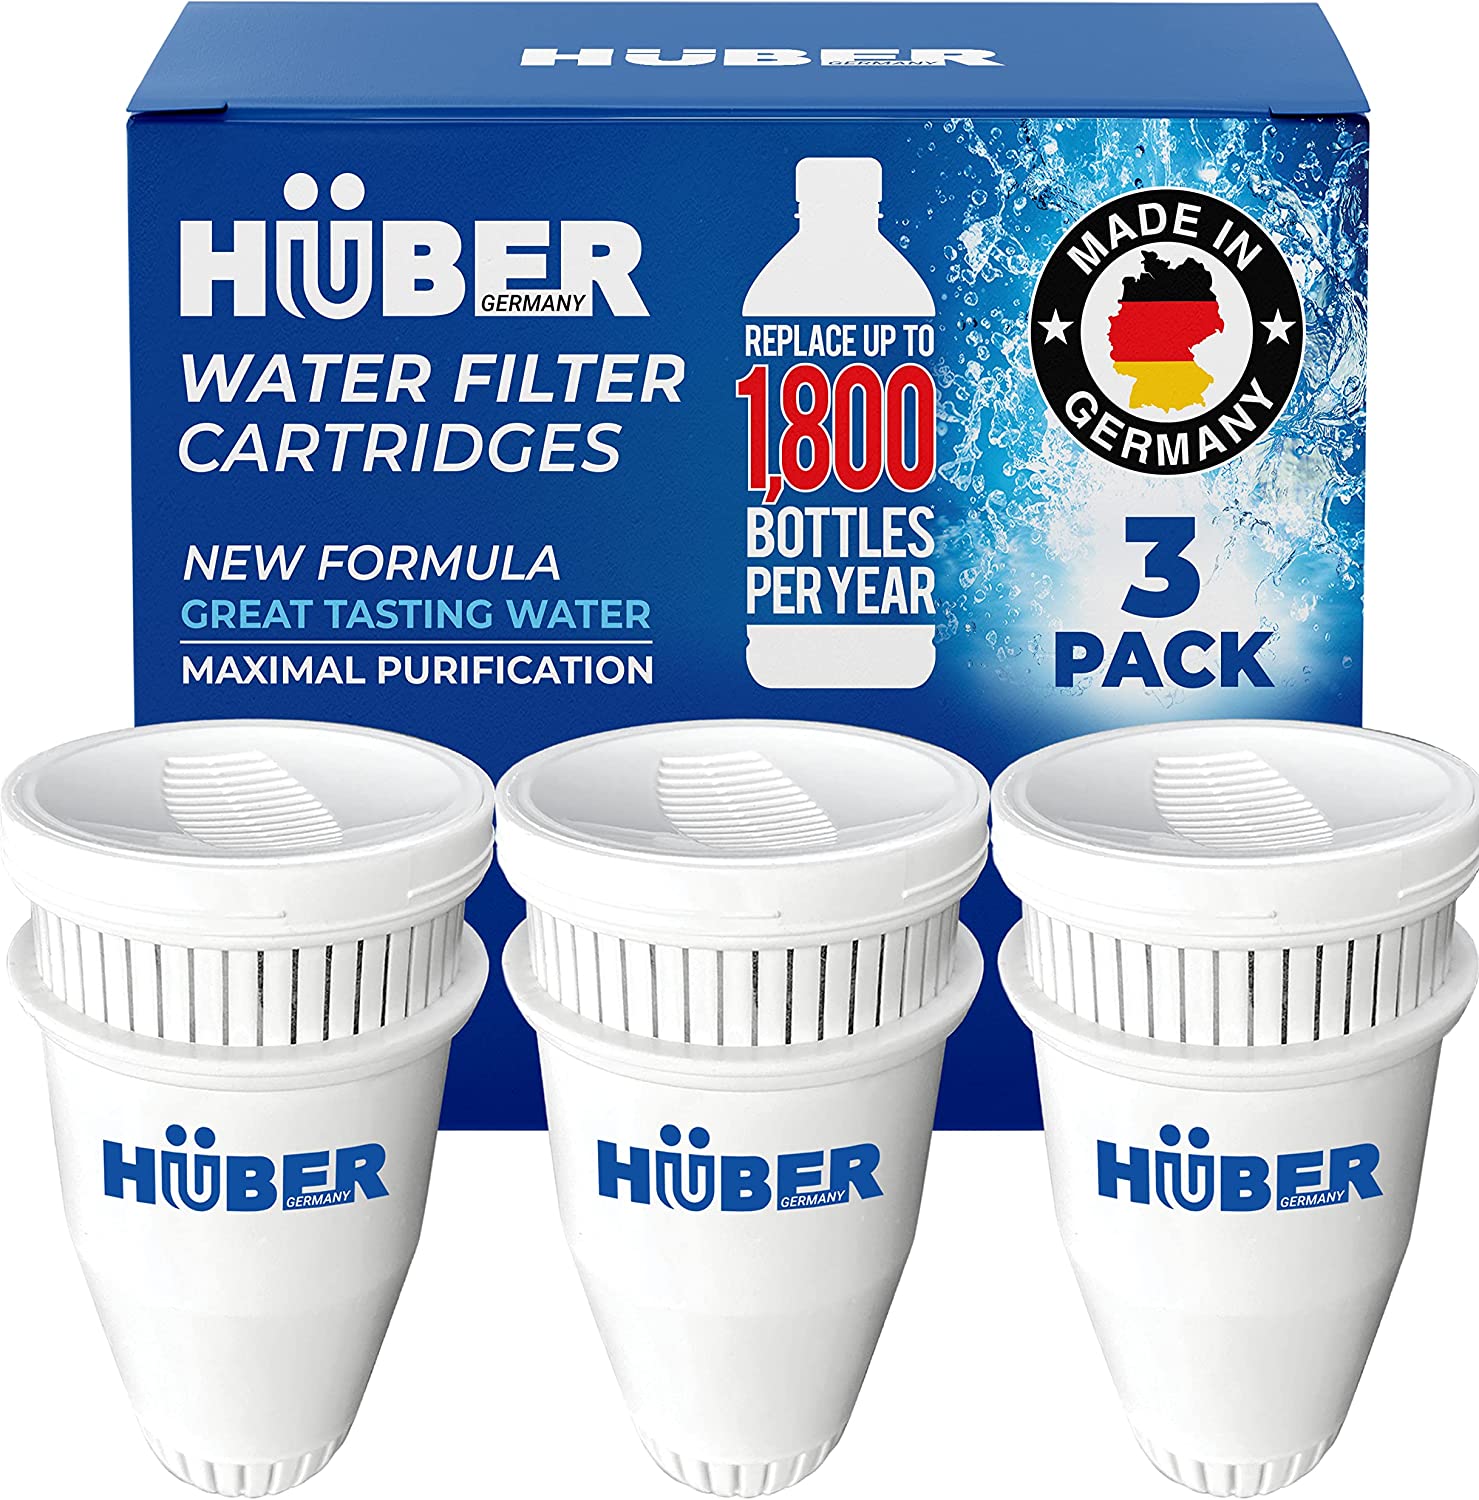 Huber Replacement Brita Water Filter for Pitchers & Dispensers, German Made Months Supply of BPA Free Water Filters, Technology for Superior Filtration & Taste, Compatible with Brita, 3-Pack